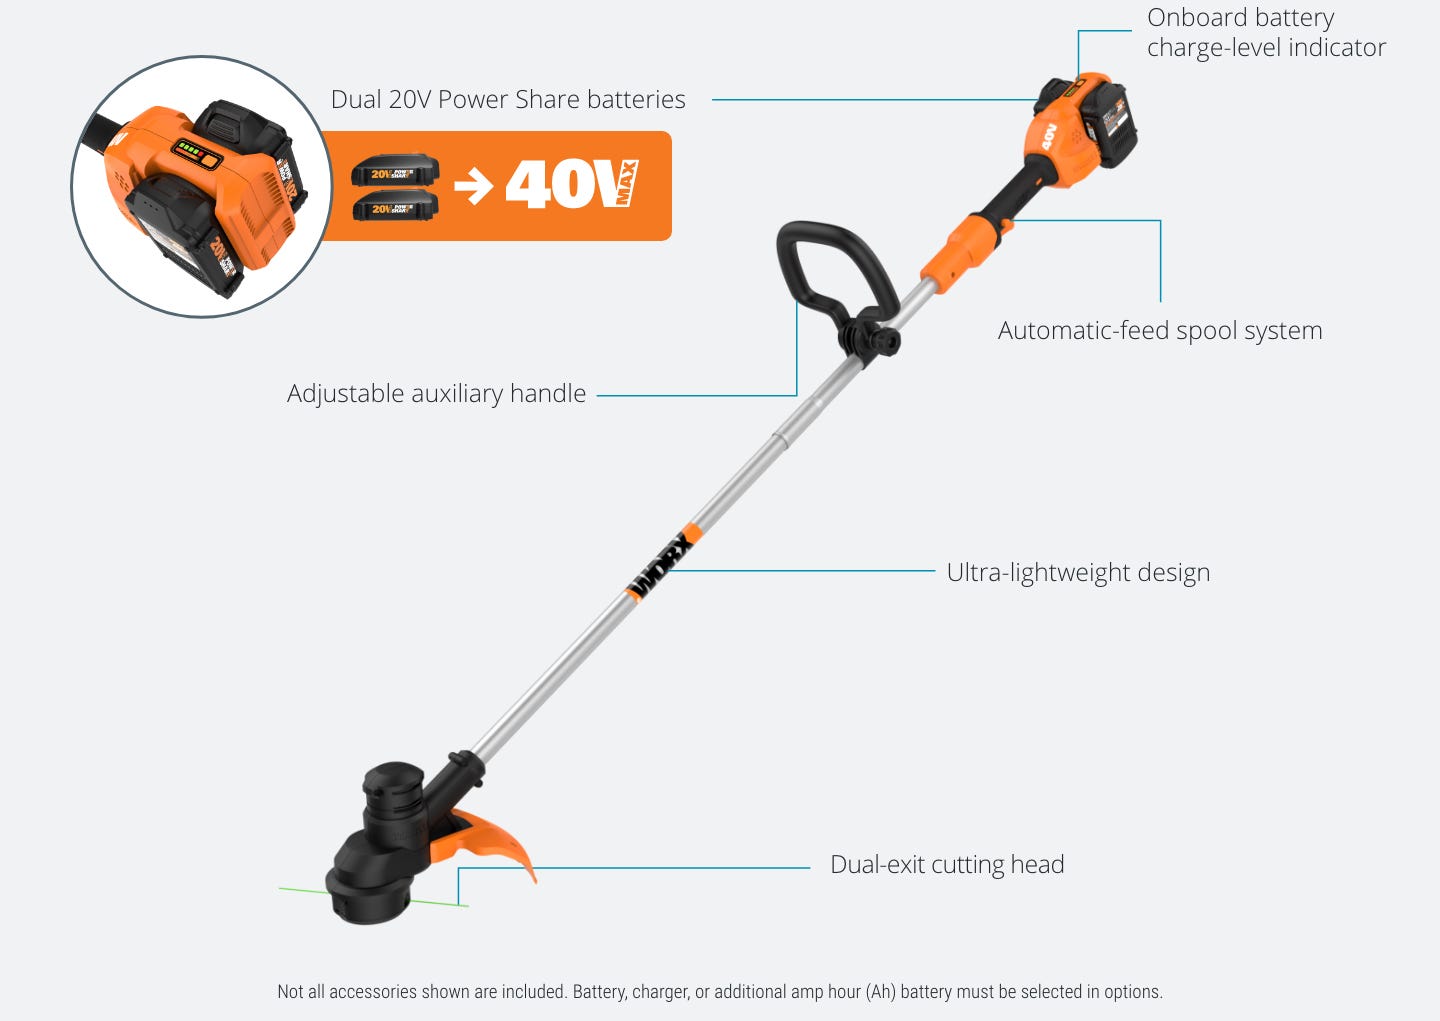 40V string trimmer featuring: onboard battery charge-level indicator, dual 20V Power Share batteries, automatic-feed spool system, adjustable auxiliary handle, ultra-lightweight design, dual-exit cutting head, not all accessories shown are included.